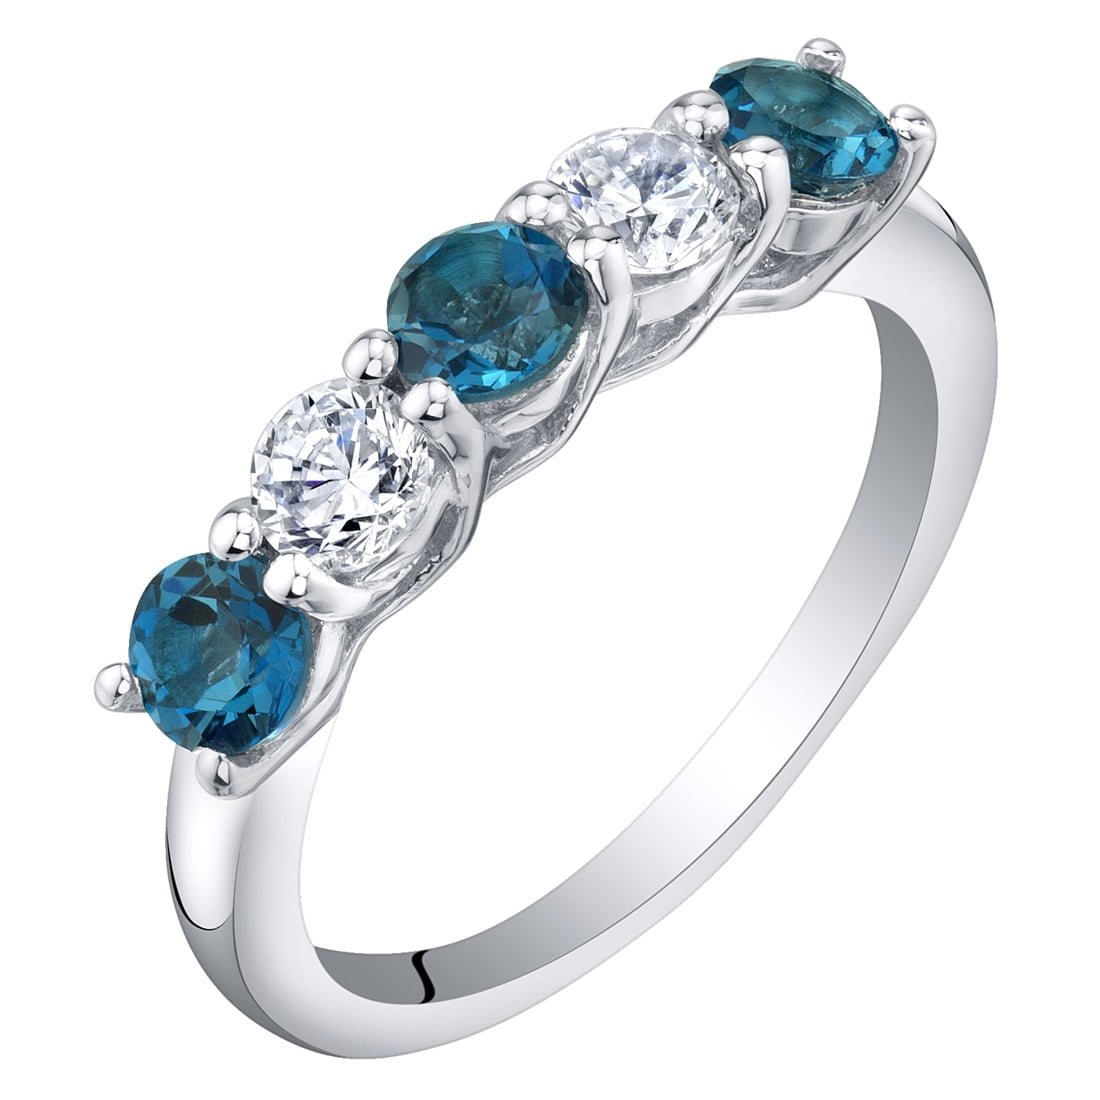 2.40 Ct Round White and Dark London Blue Topaz 925 Sterling Silver 3-Stone Ring 